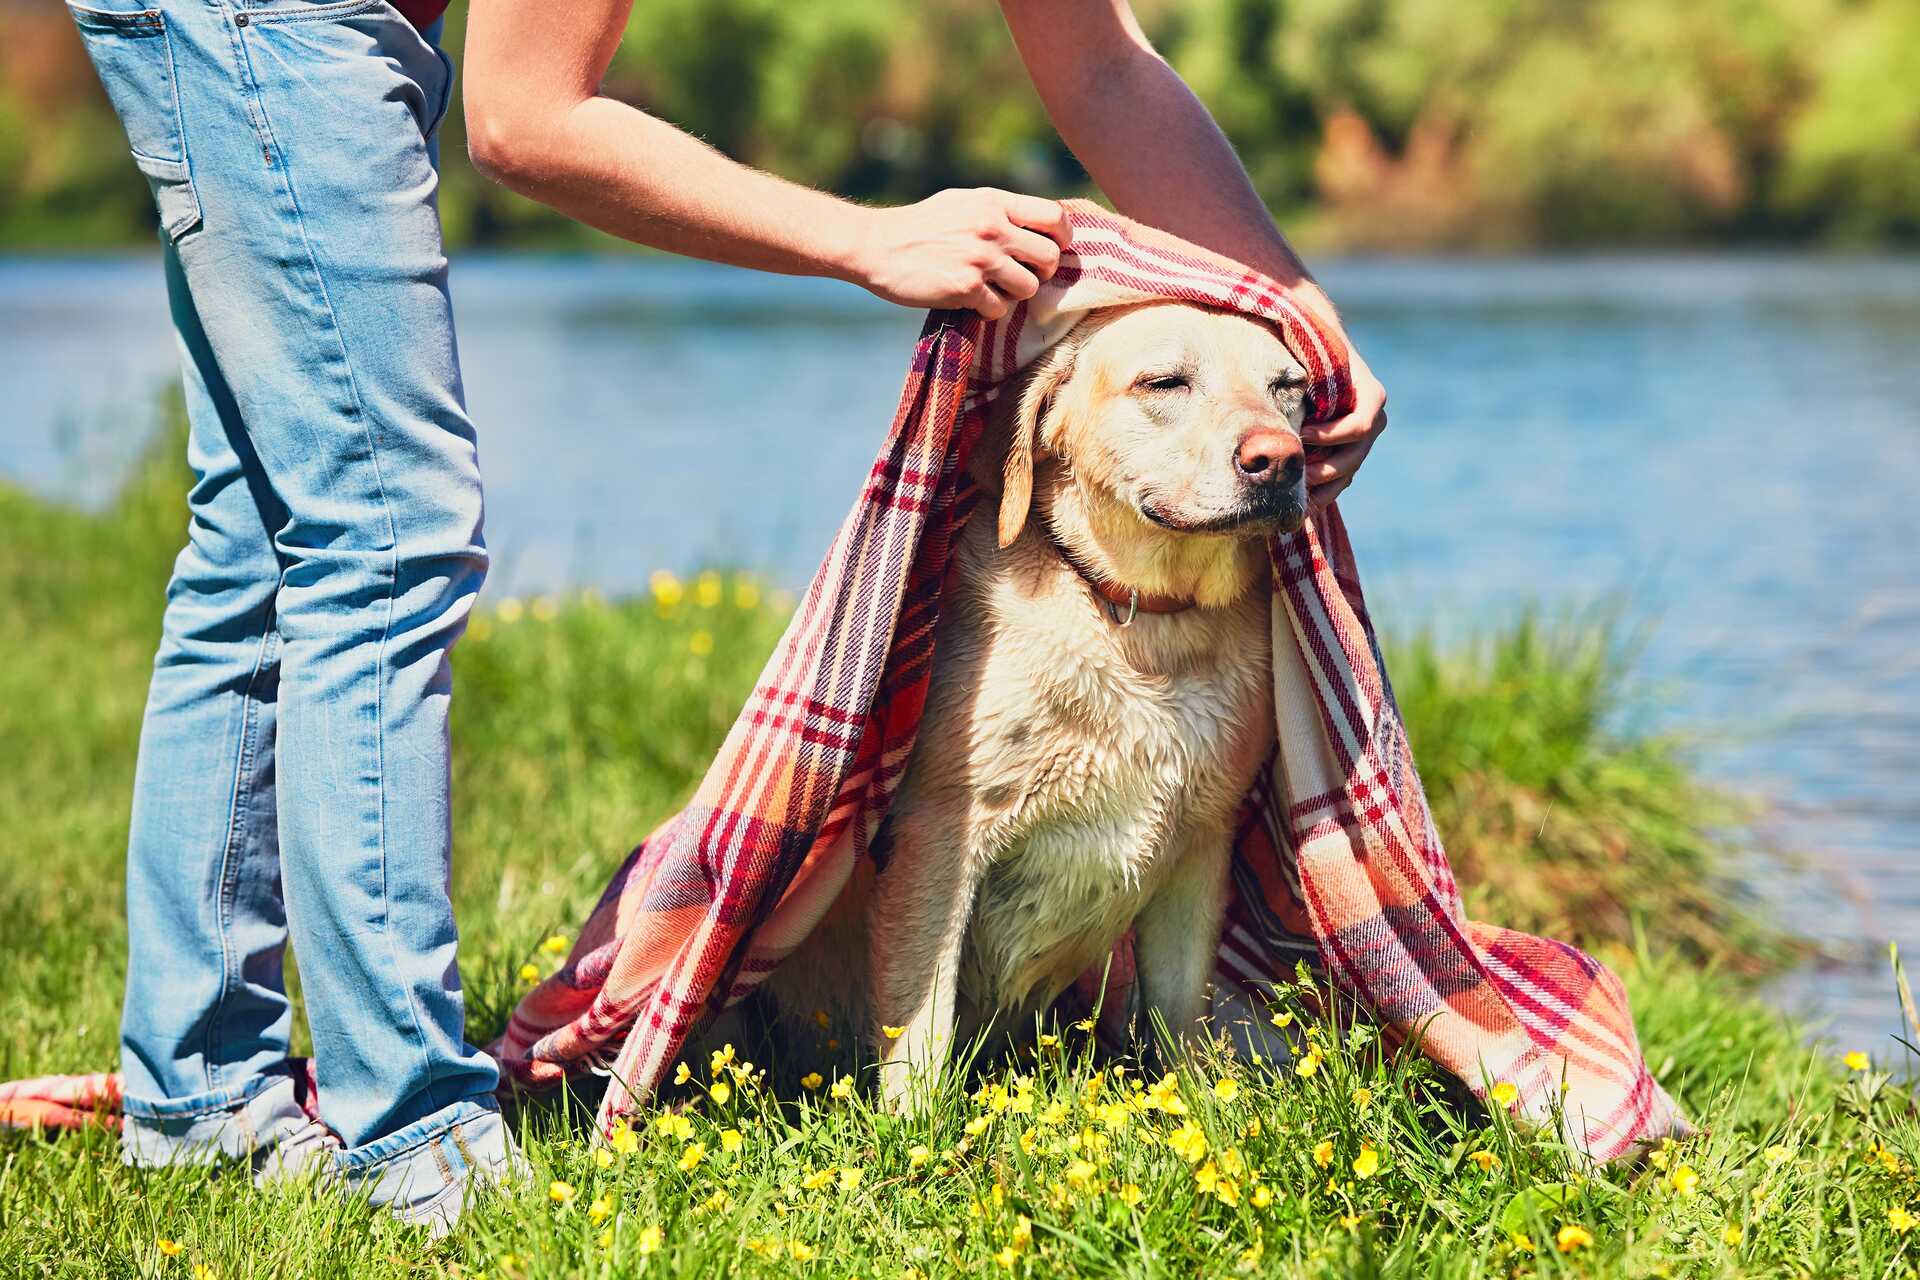 A woman placing a red checkered blanket on a dog outdoors